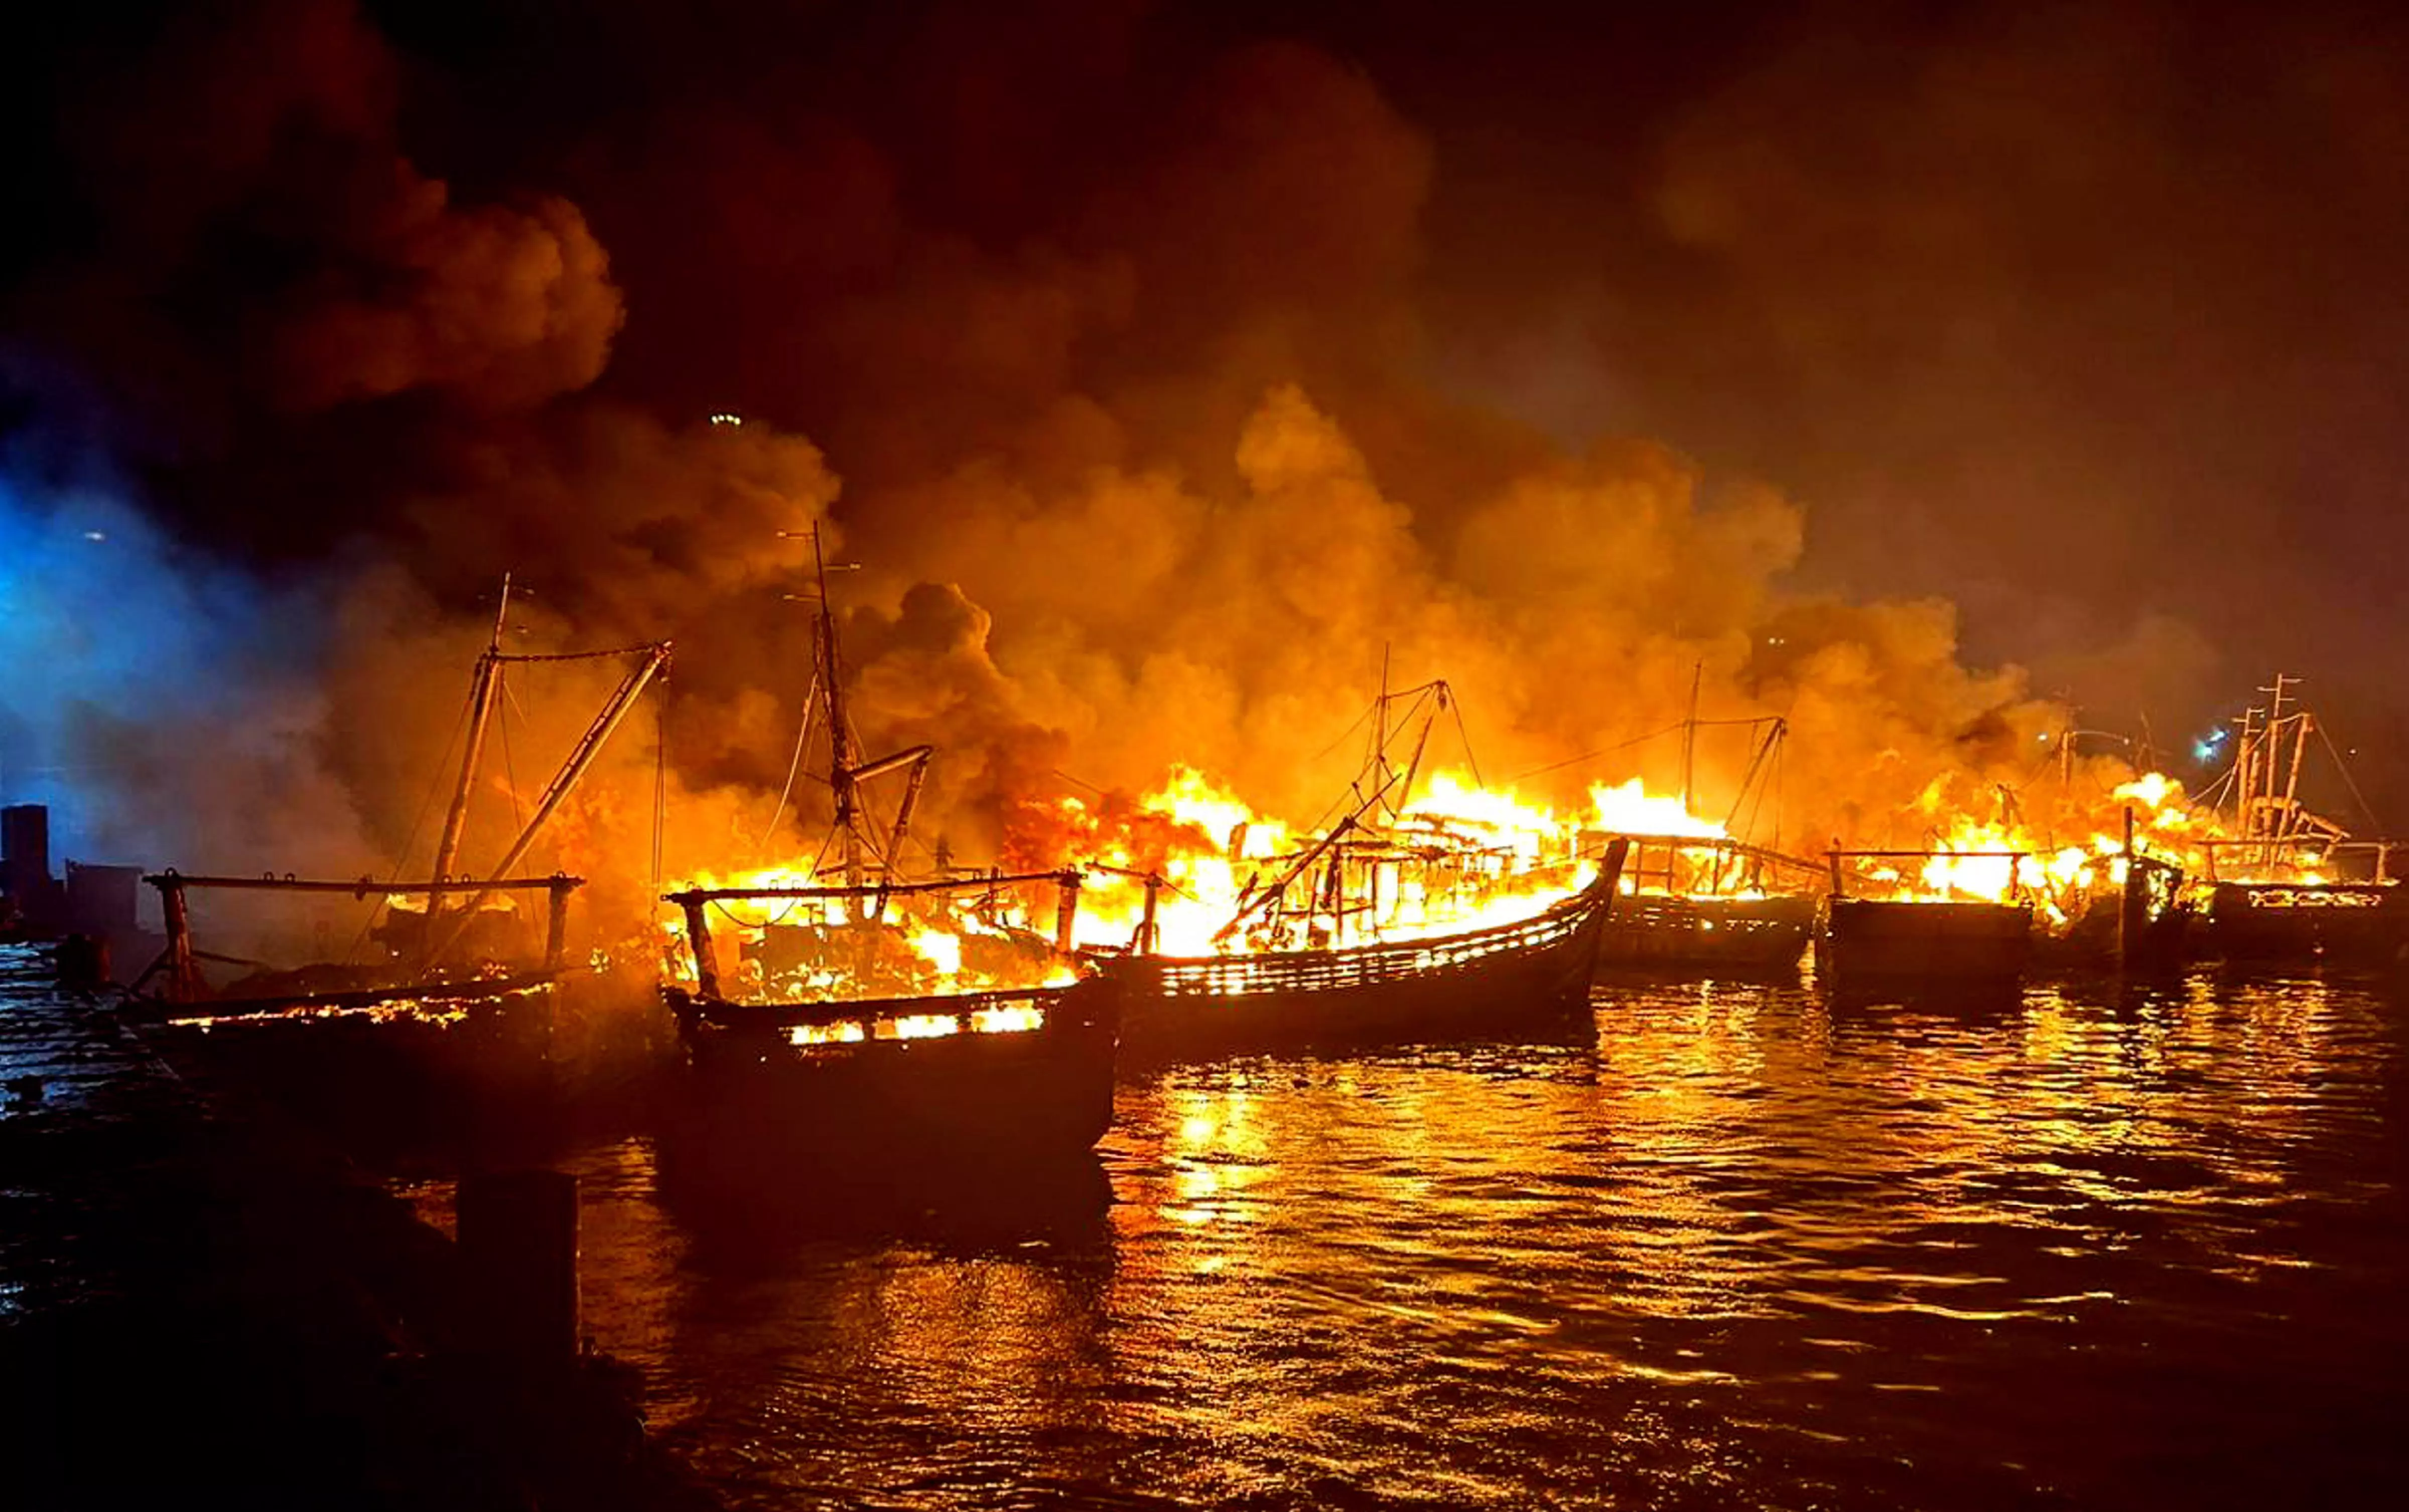 35 boats gutted at Visakhapatnam jetty area